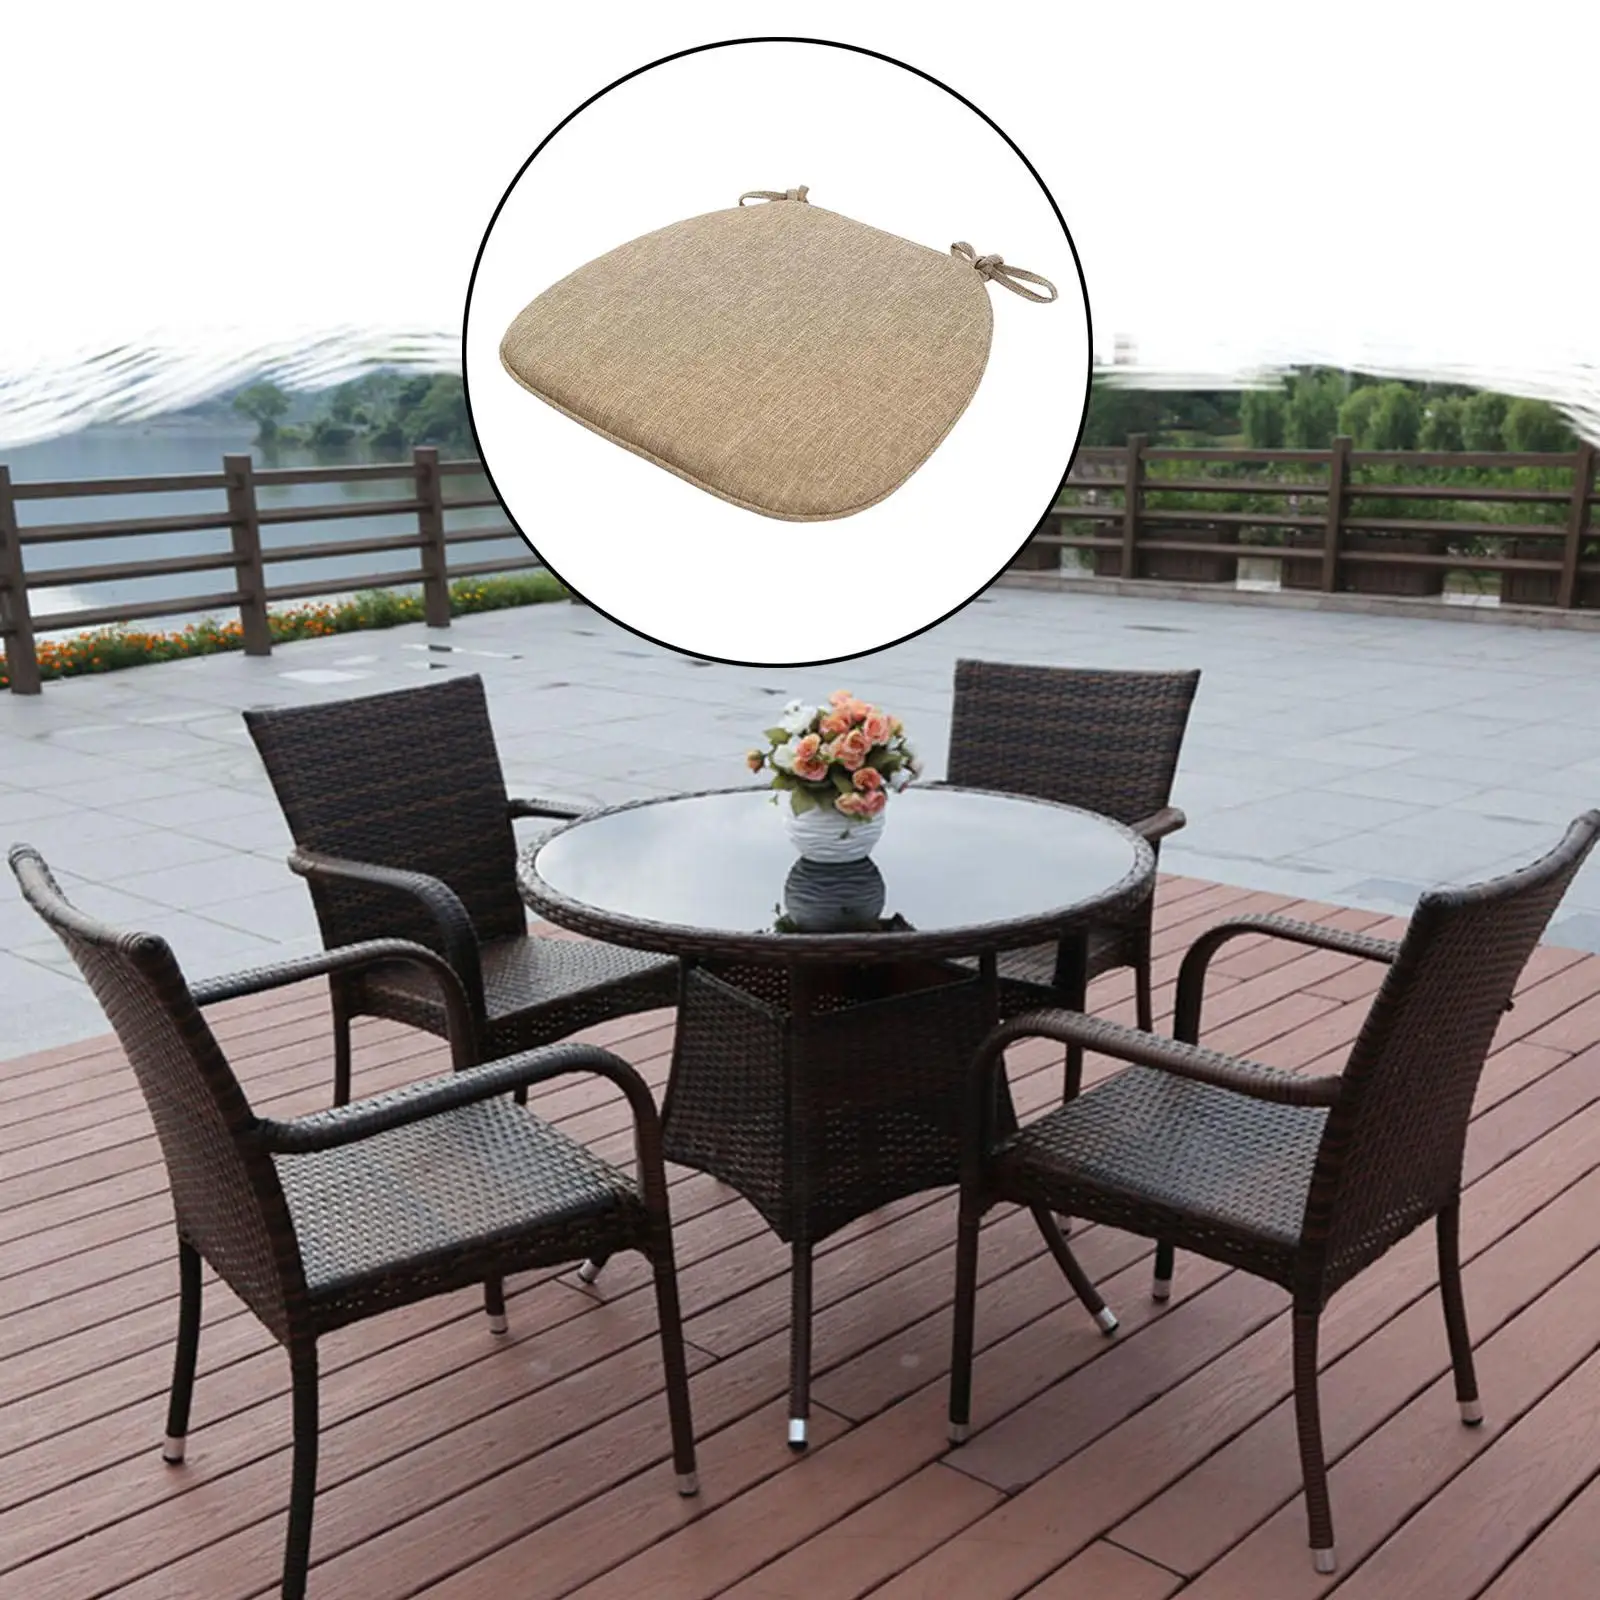  Cushion for Dining s, indoor  Garden Patio Home Furniture  Cushion